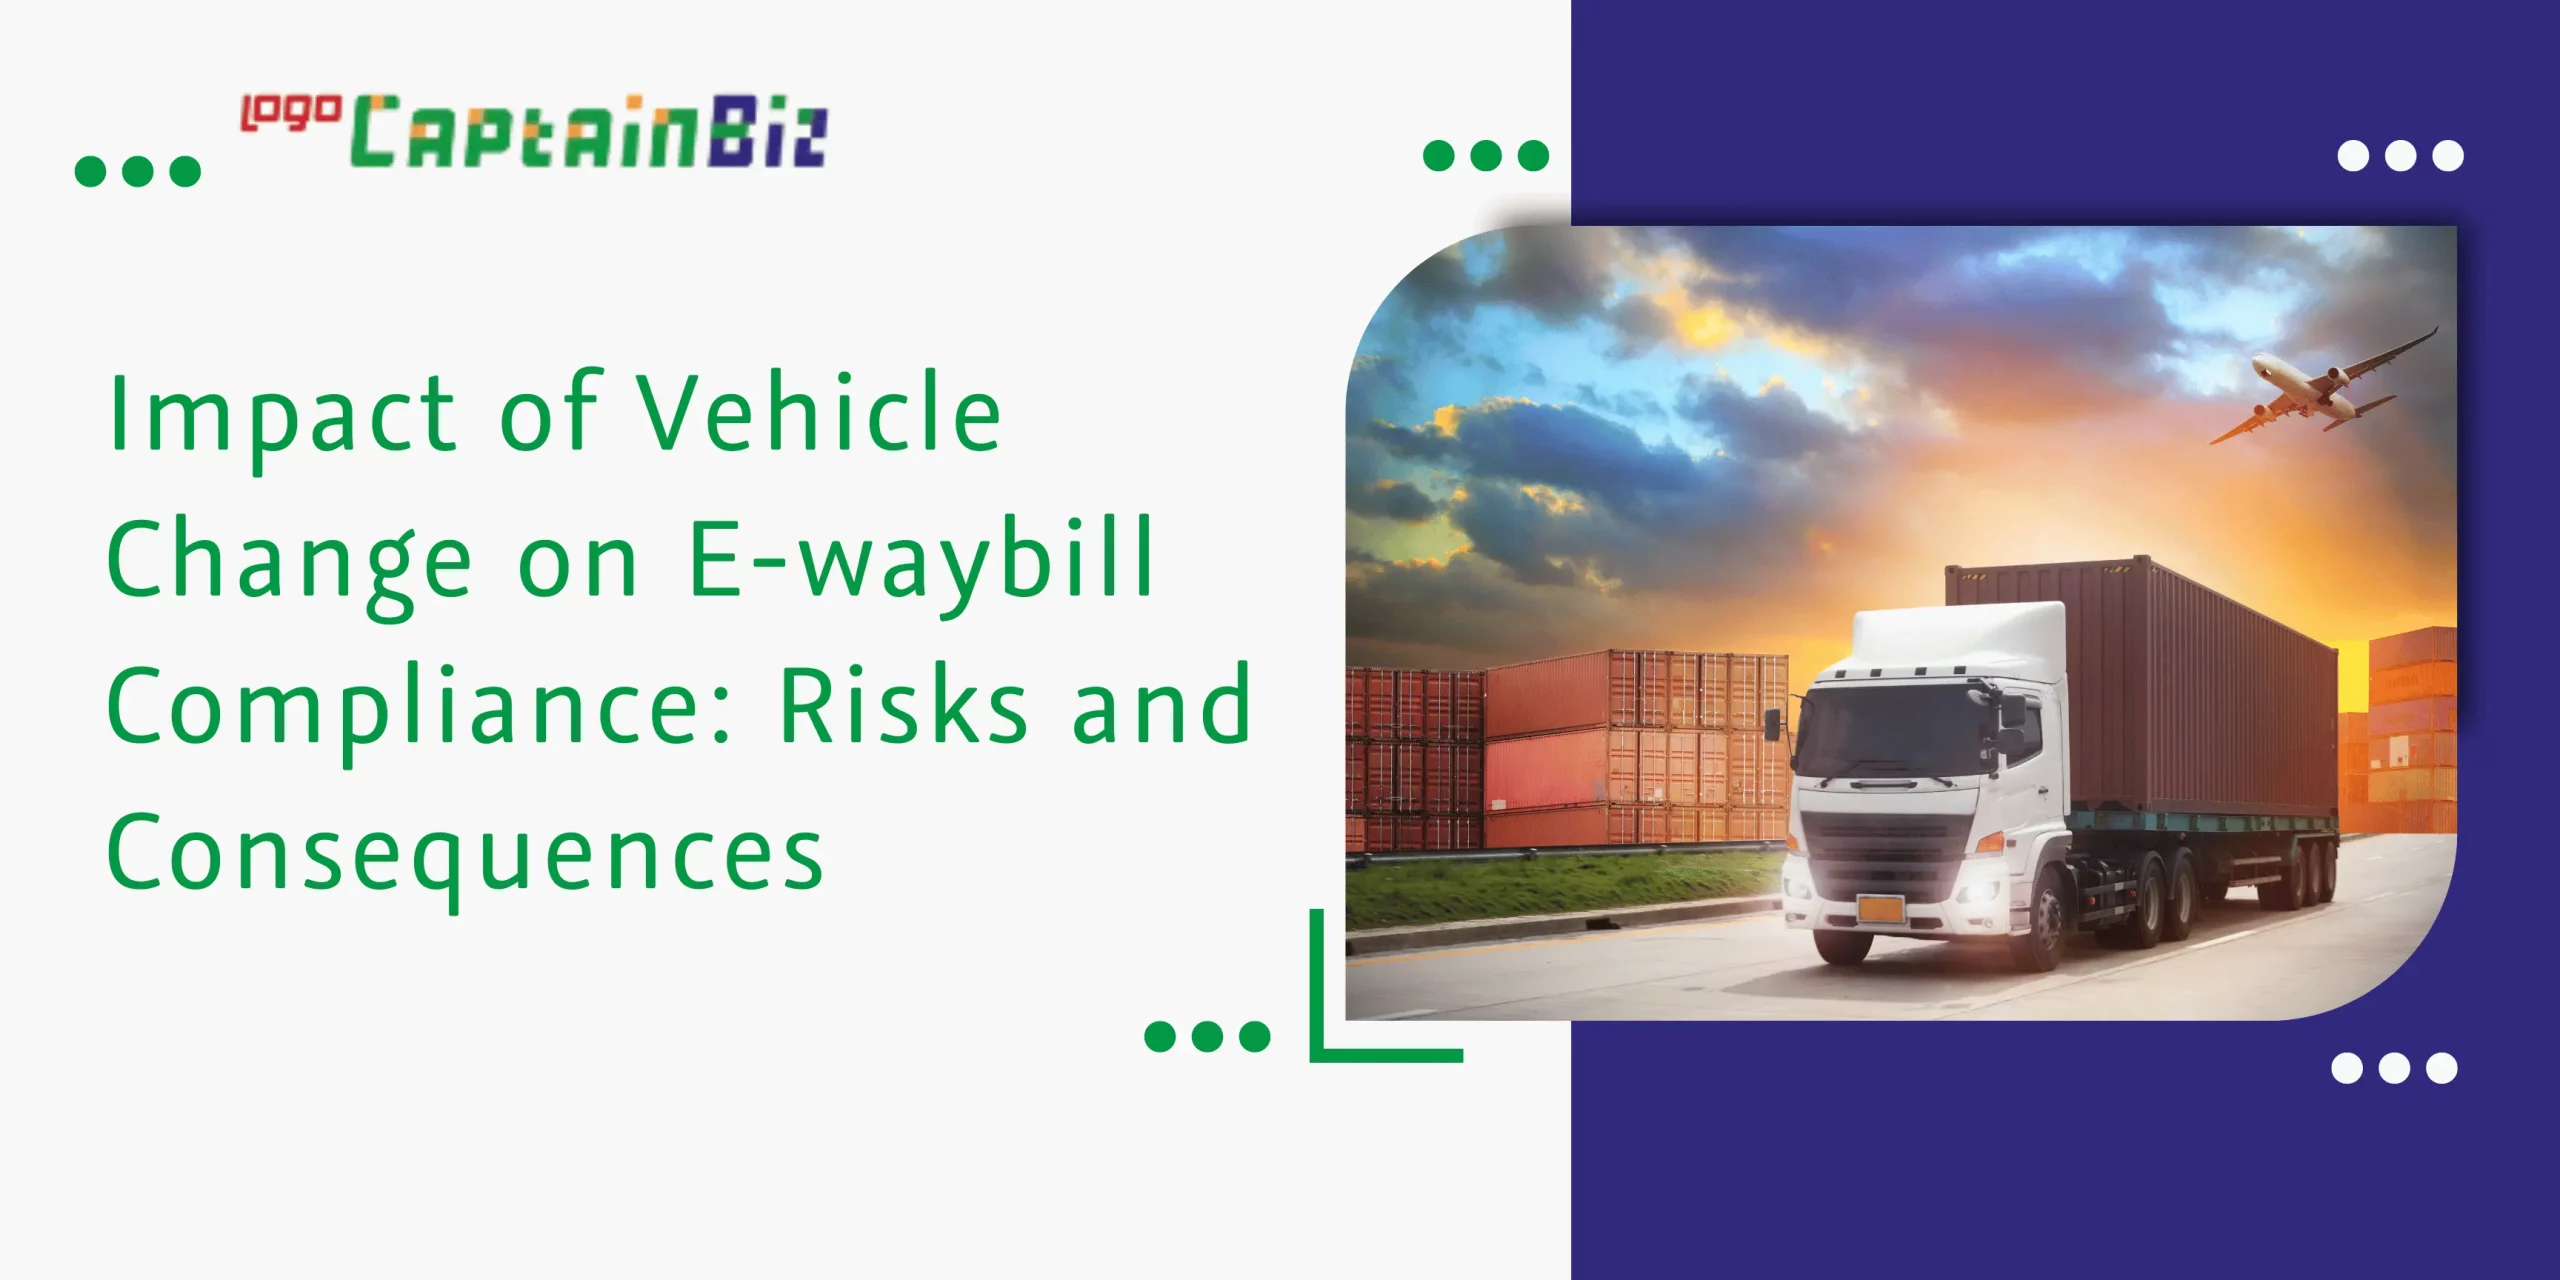 CaptainBiz: impact of vehicle change on e-waybill compliance: risks and consequences